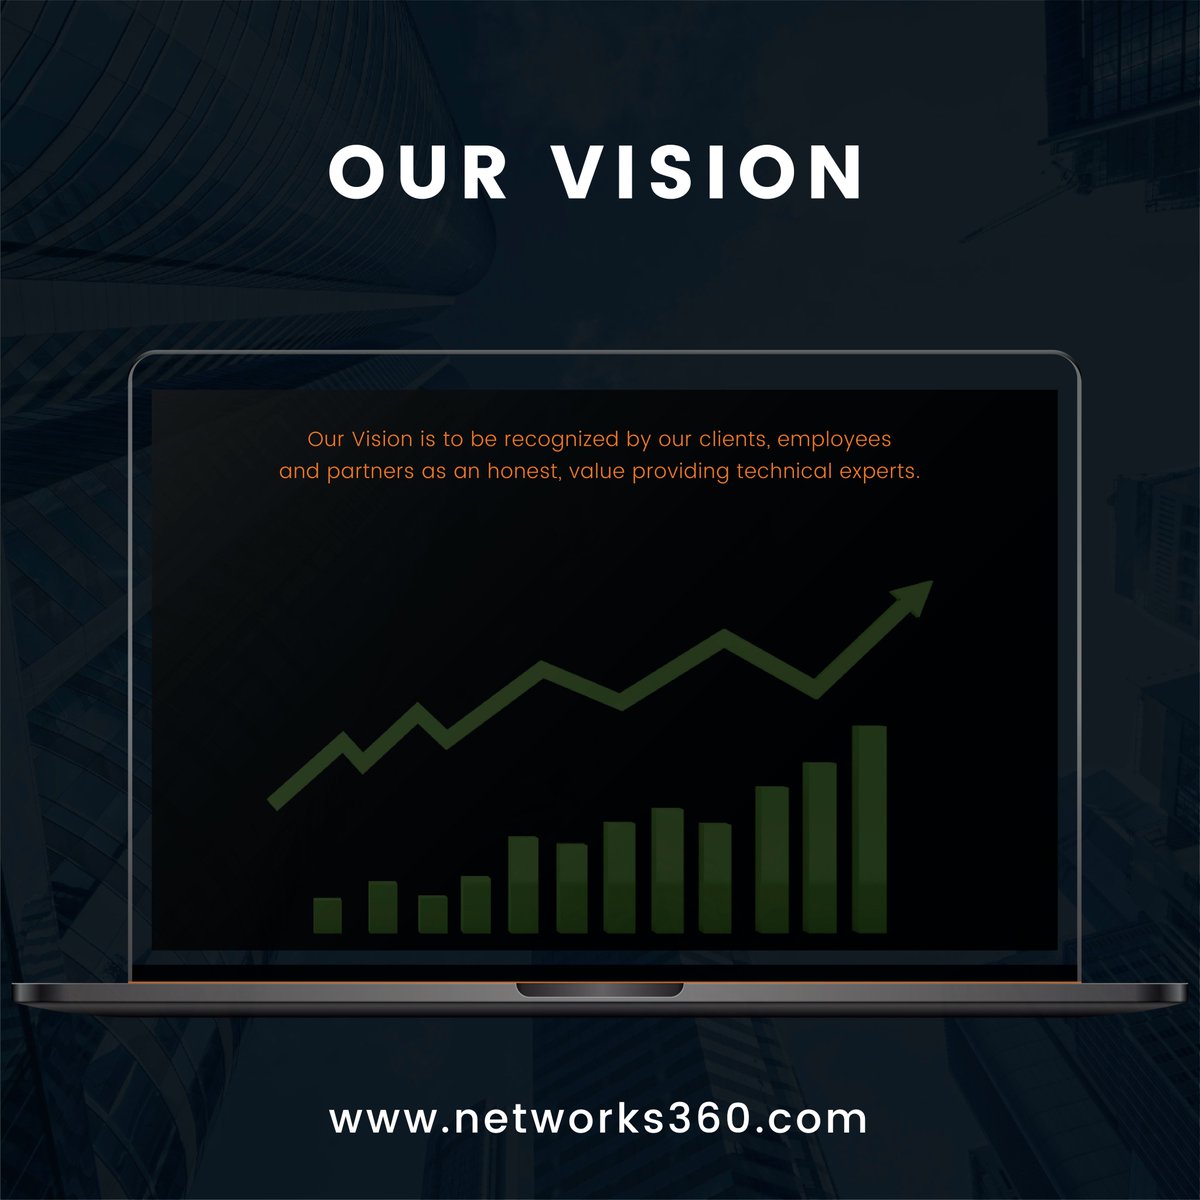 Networks360: A Vision of Excellence

Feel Free to Contact us:
📞 (832) 740-4444
📩 info@networks360.net
🌐 networks360.net

#networks360 #TechExcellence #technology #ValueProviding #technicalexperts #houston #valuesdriven #ITExcellence #managedserviceprovider